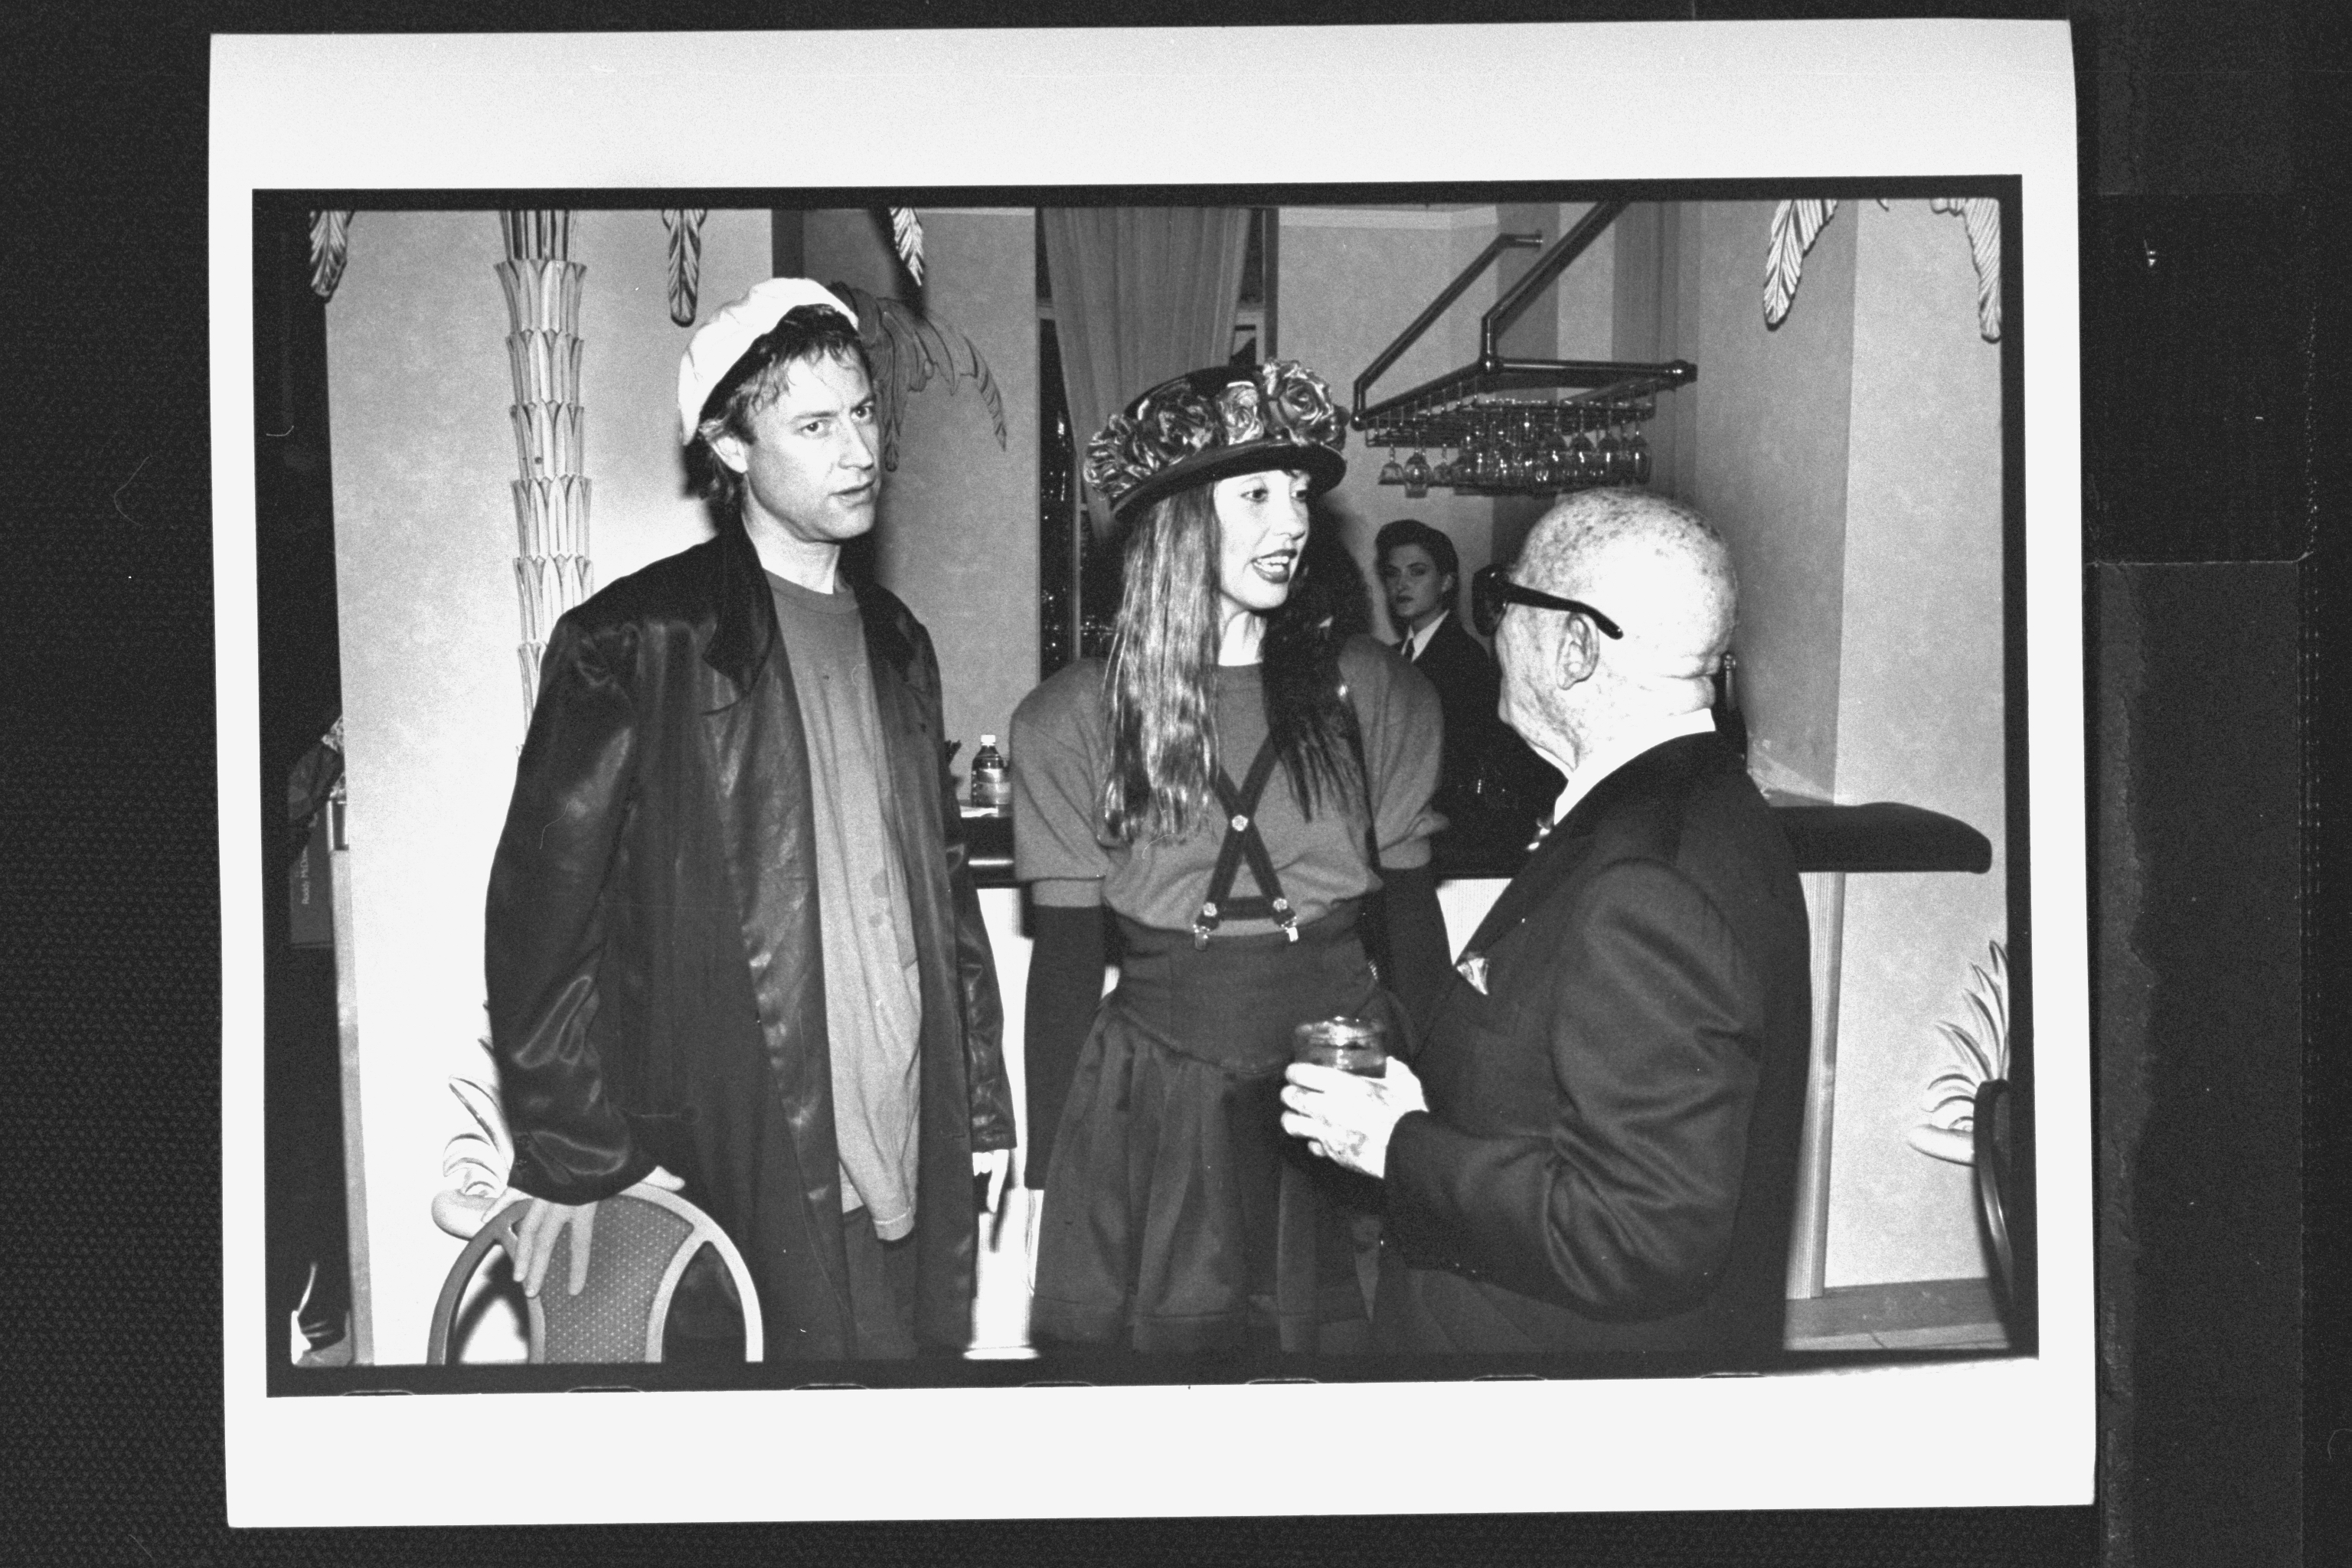 Literary agent Swifty Lazar (R) chatting with actress Shelley Duvall & her boyfriend Dan Gilroy at a party honoring Roddy McDowall's new book of photographs. | Source: Getty Images